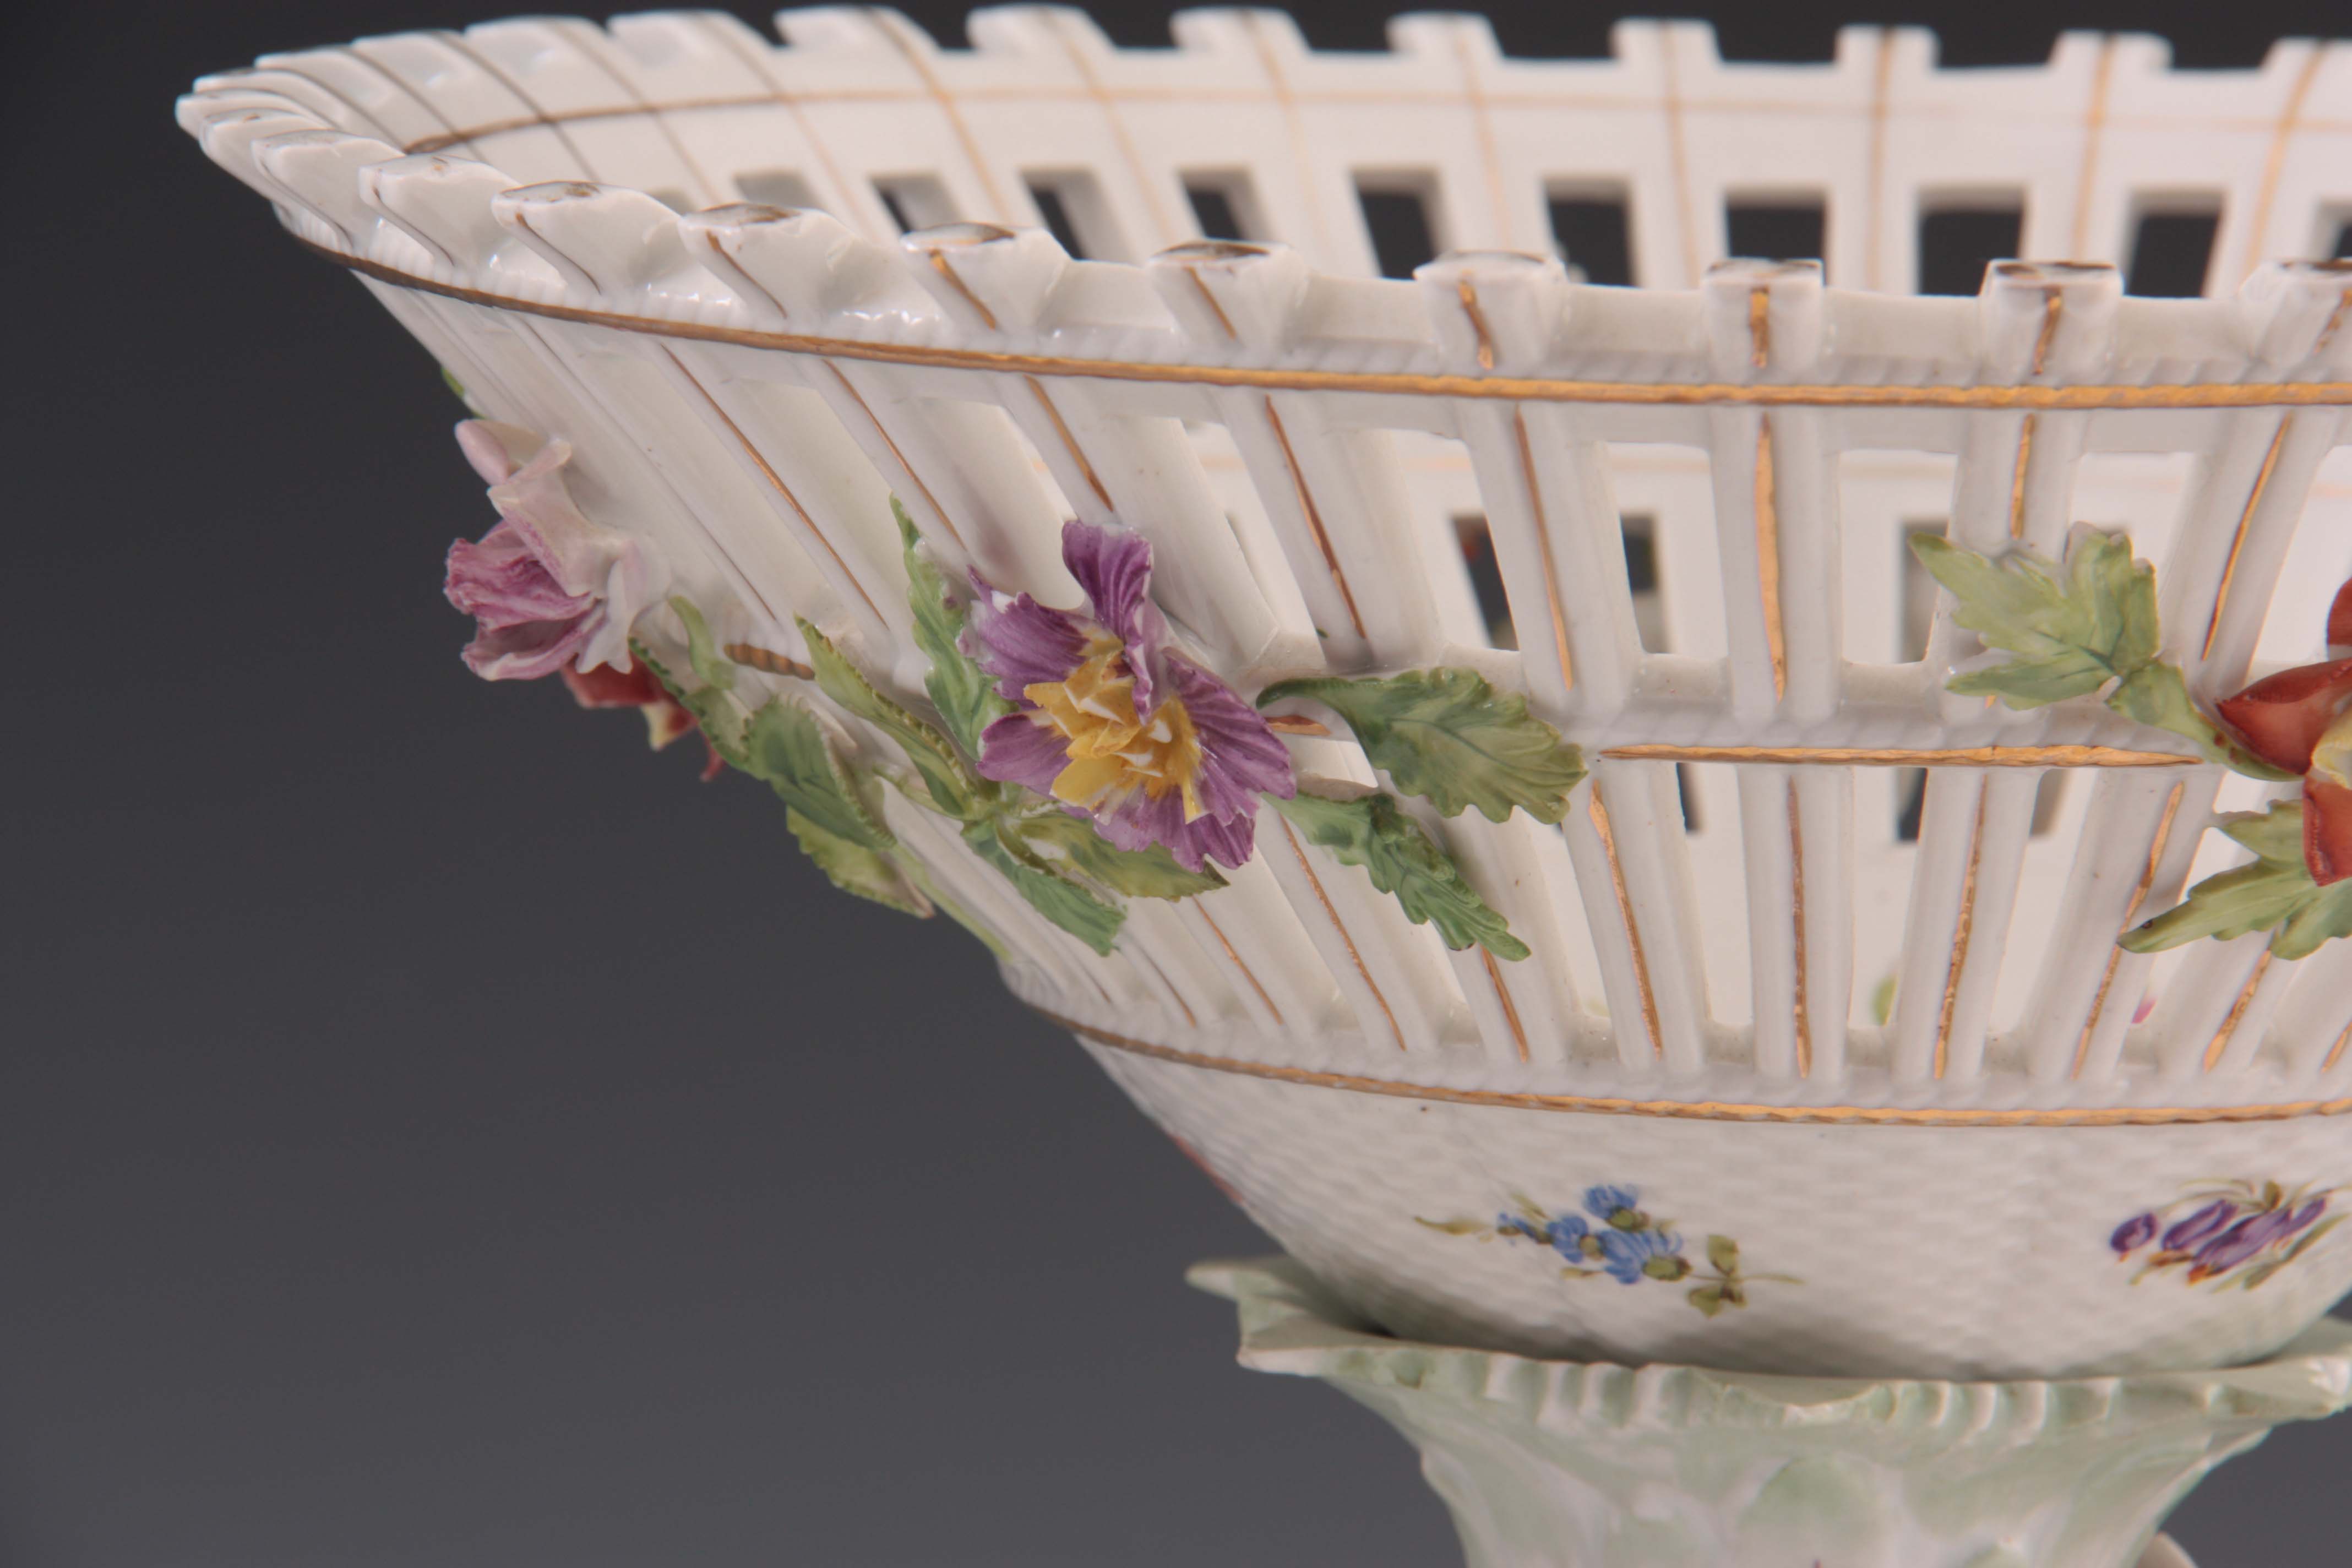 TWO 19TH CENTURY DRESDEN PORCELAIN COMPOTE CENTREPIECES with figural cherub bases and pierced basket - Image 5 of 9